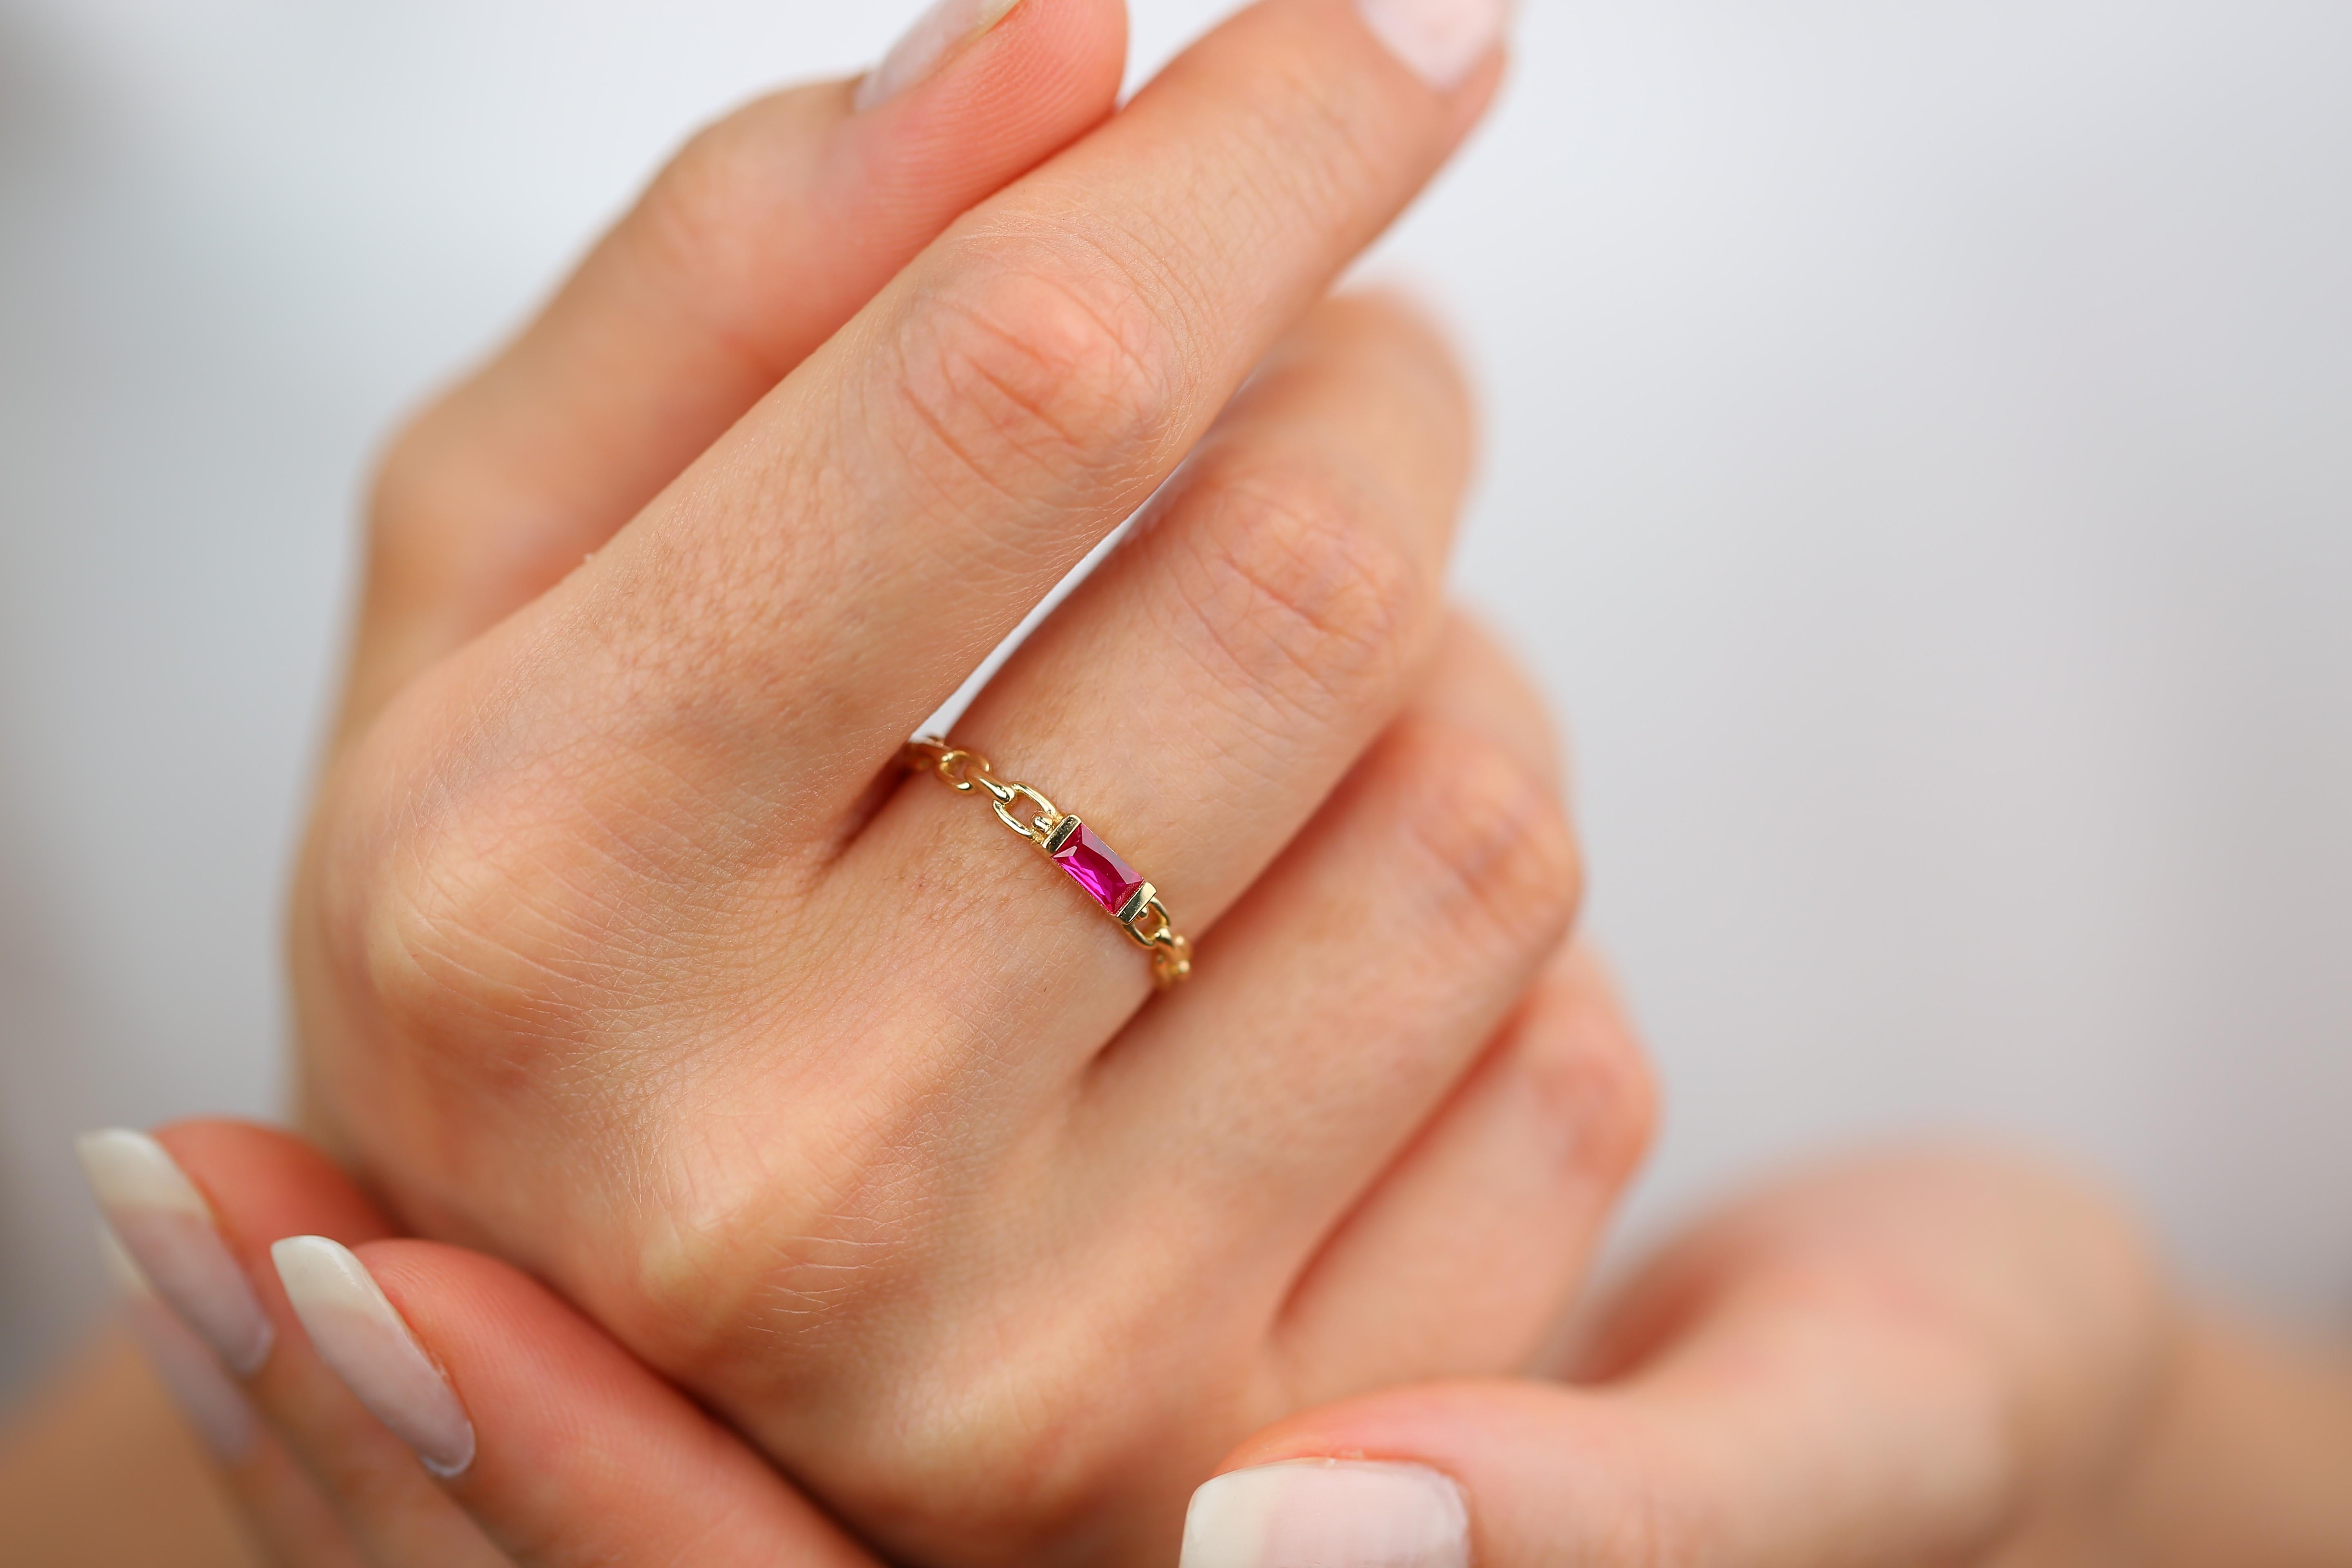 For Sale:  14 K Solid Gold Chain Link Ring -with Pink Quartz, Modern Minimal Ring 15